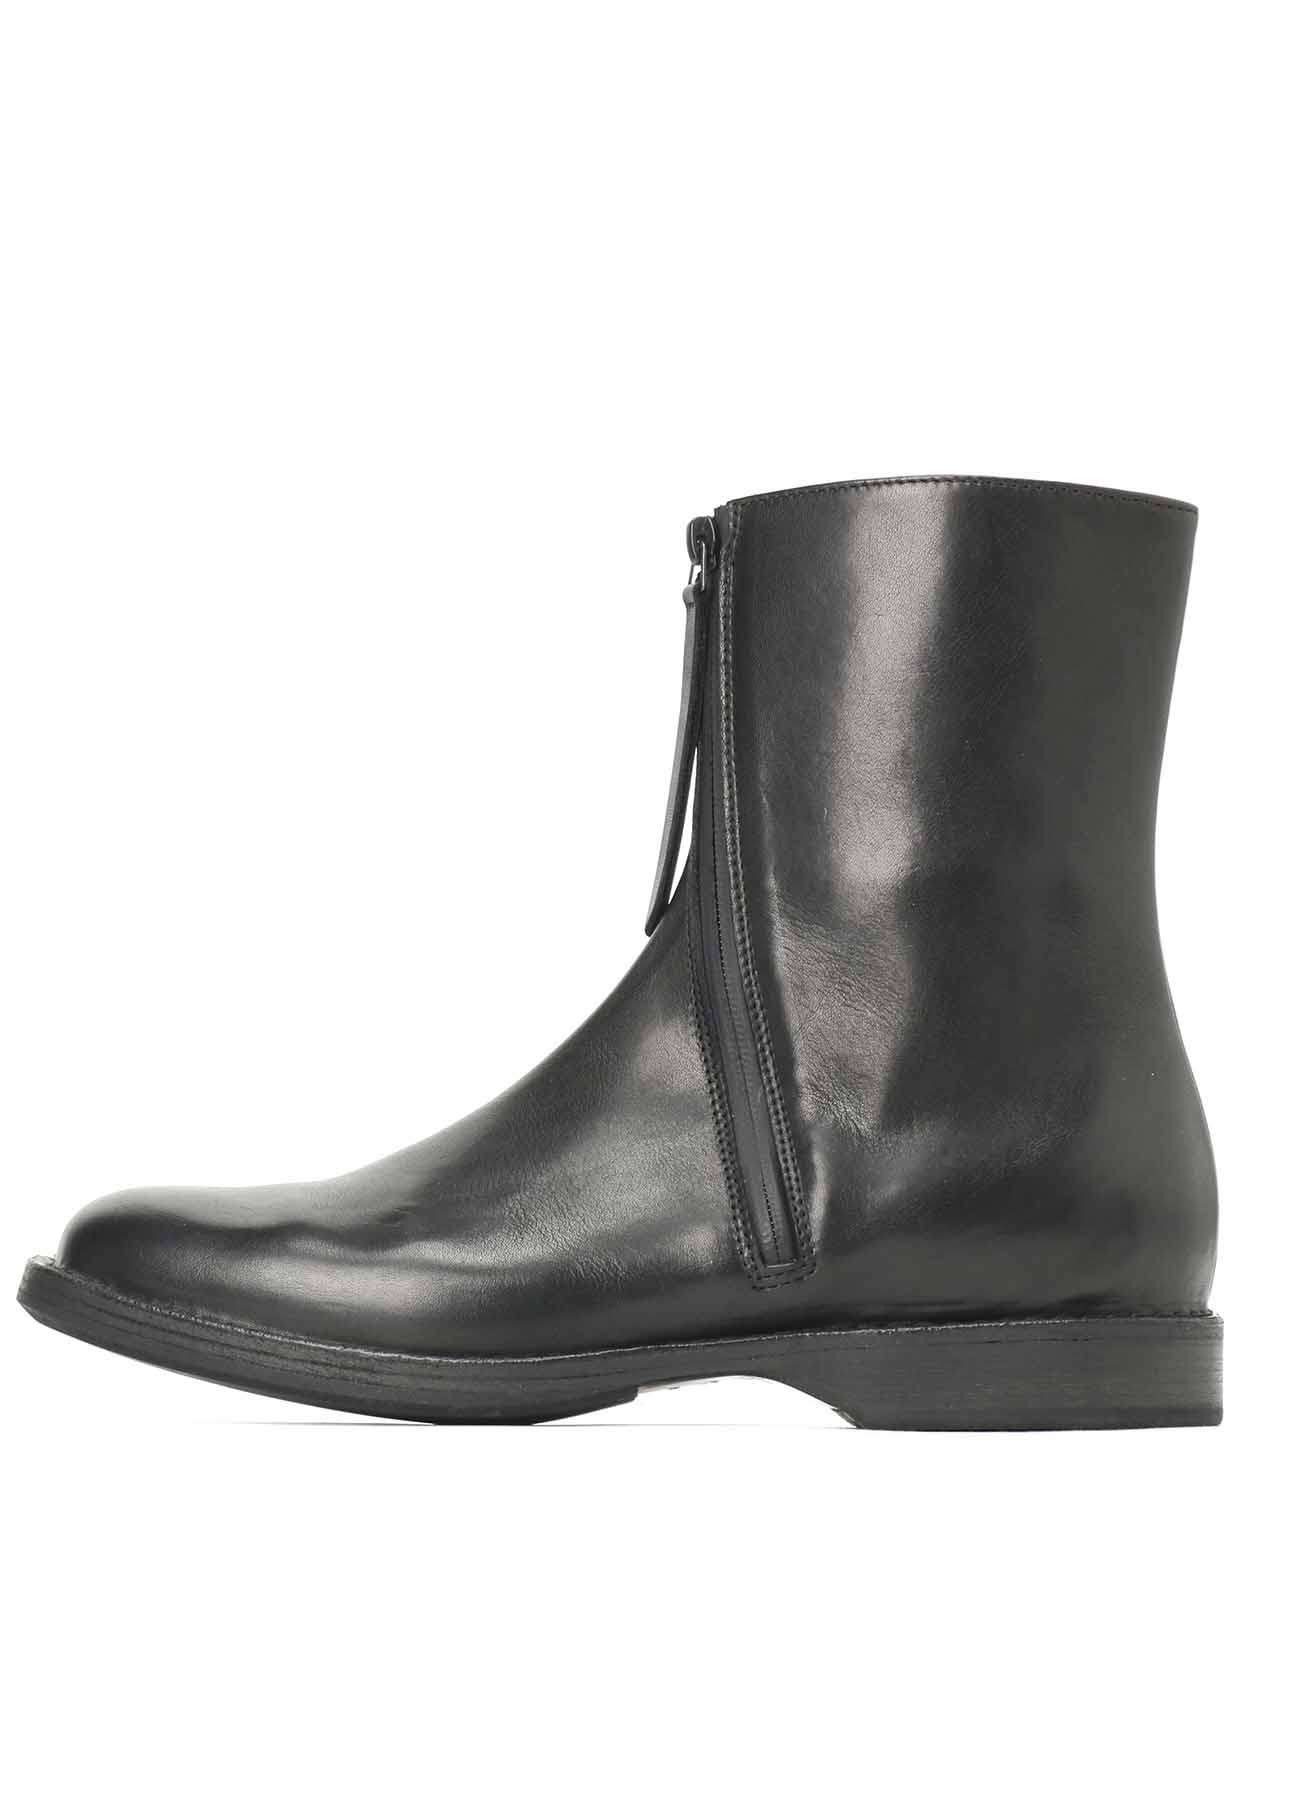 WAXED CALF LEATHER CURVED ZIPPER BOOTS(26 Black): Vintage｜THE 